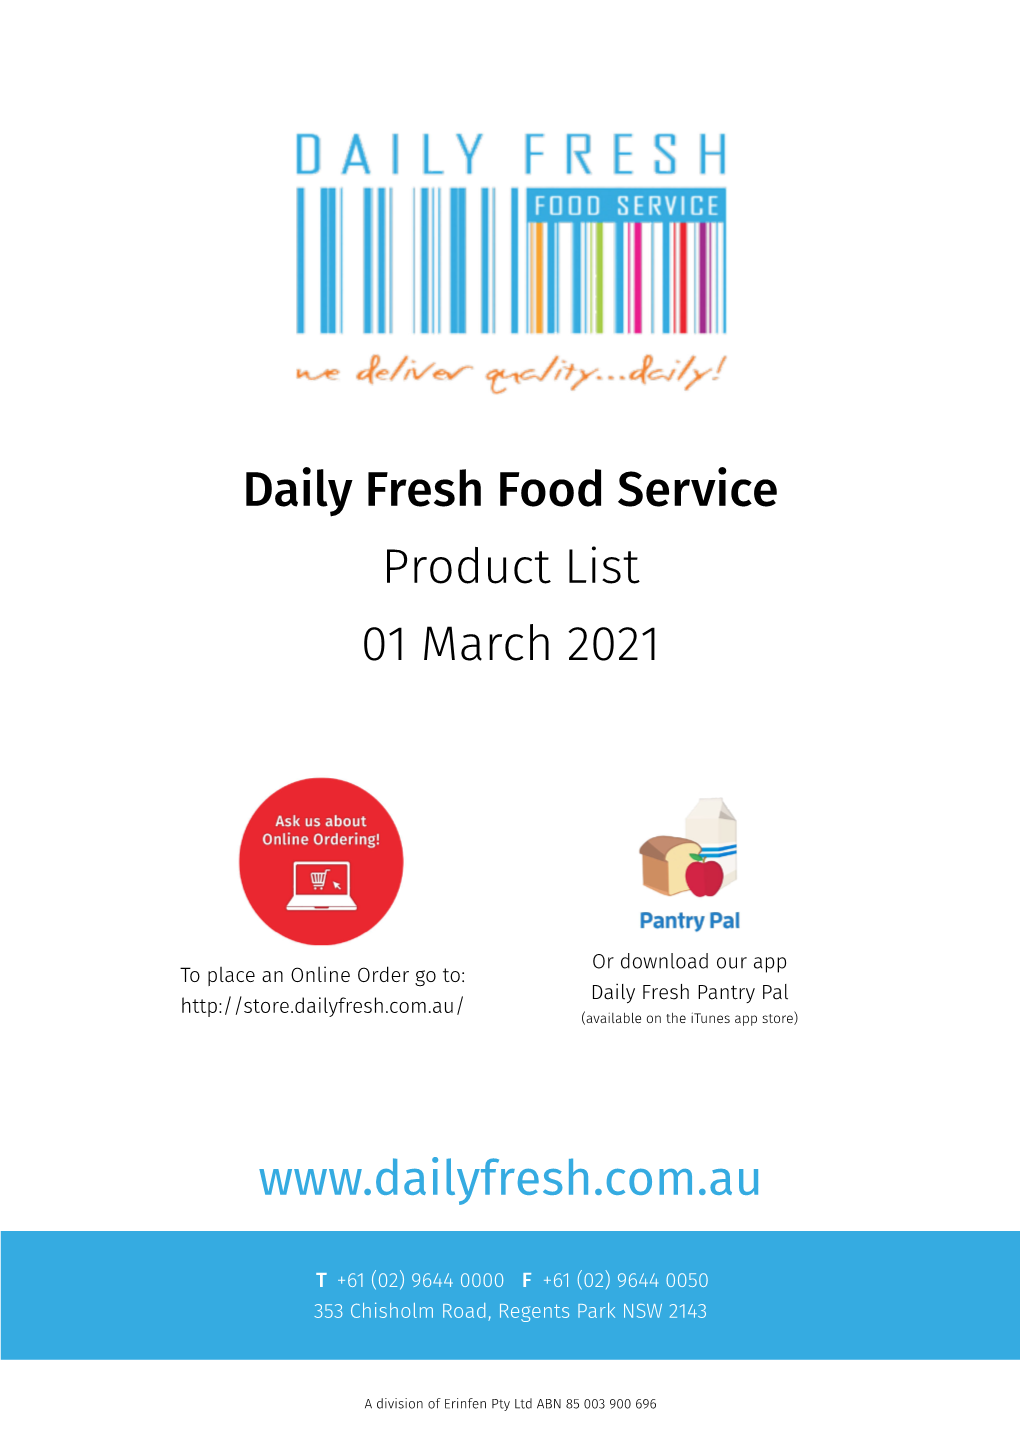 Daily Fresh Food Service Product List 01 March 2021